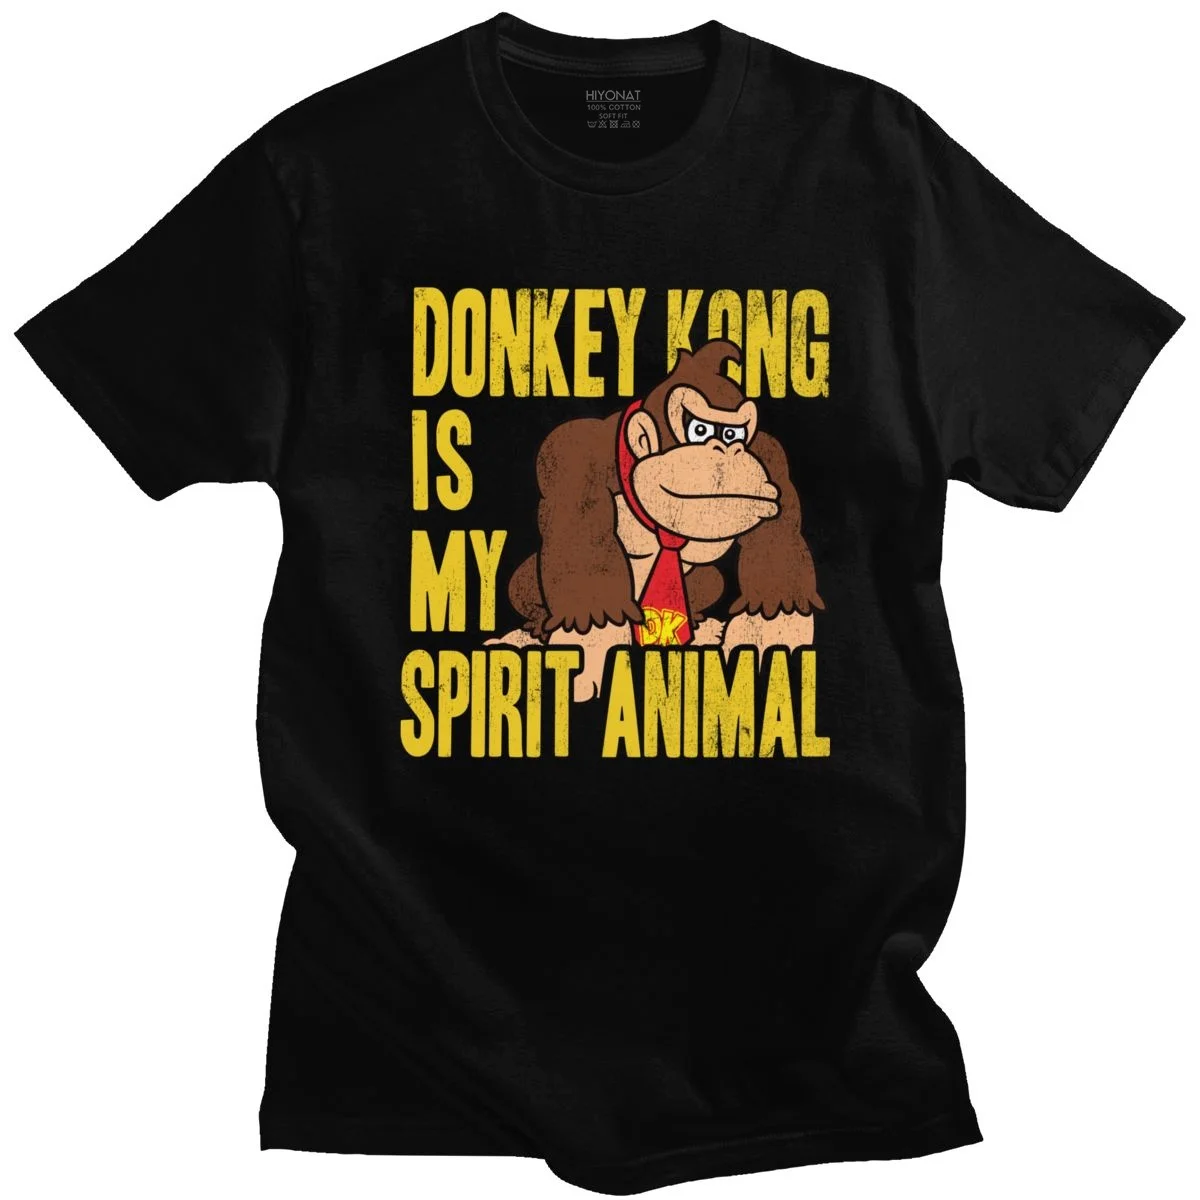 Vintage Donkey Kong Is My Spirit Animal Tshirt For Men Short Sleeve Video  Game Tee Shirt Loose Fit Cotton T-shirt Clothes Gift - T-shirts - AliExpress